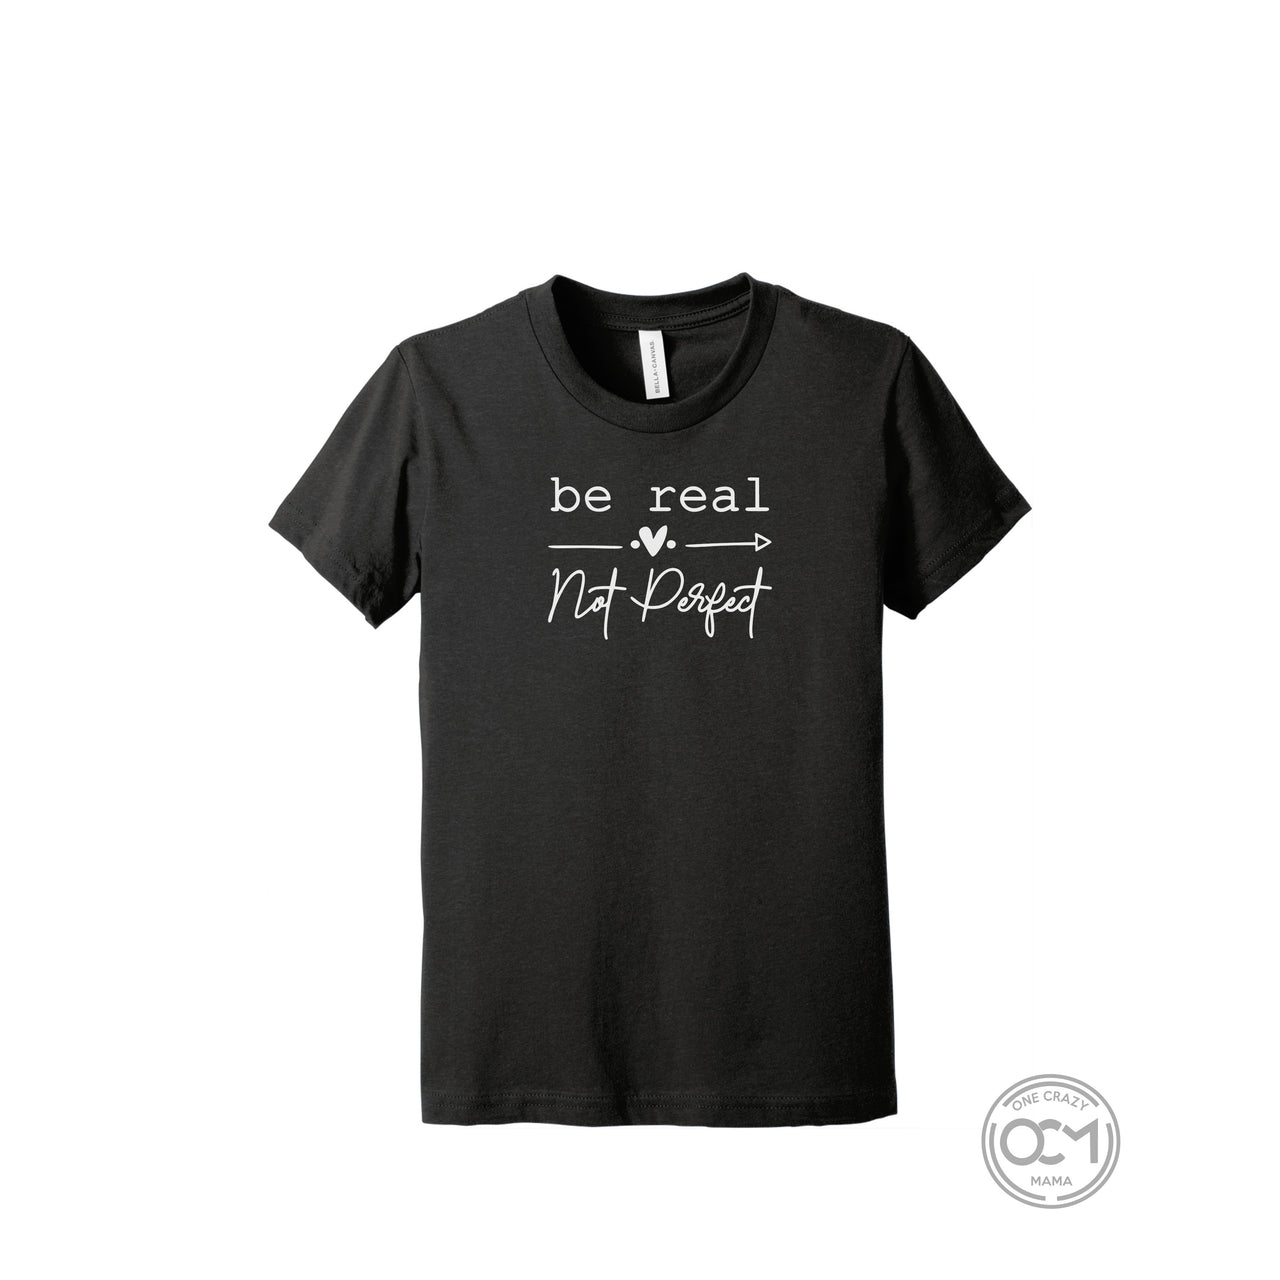 Youth - Unisex Cotton/Poly Tee - (Be Real Not Perfect)